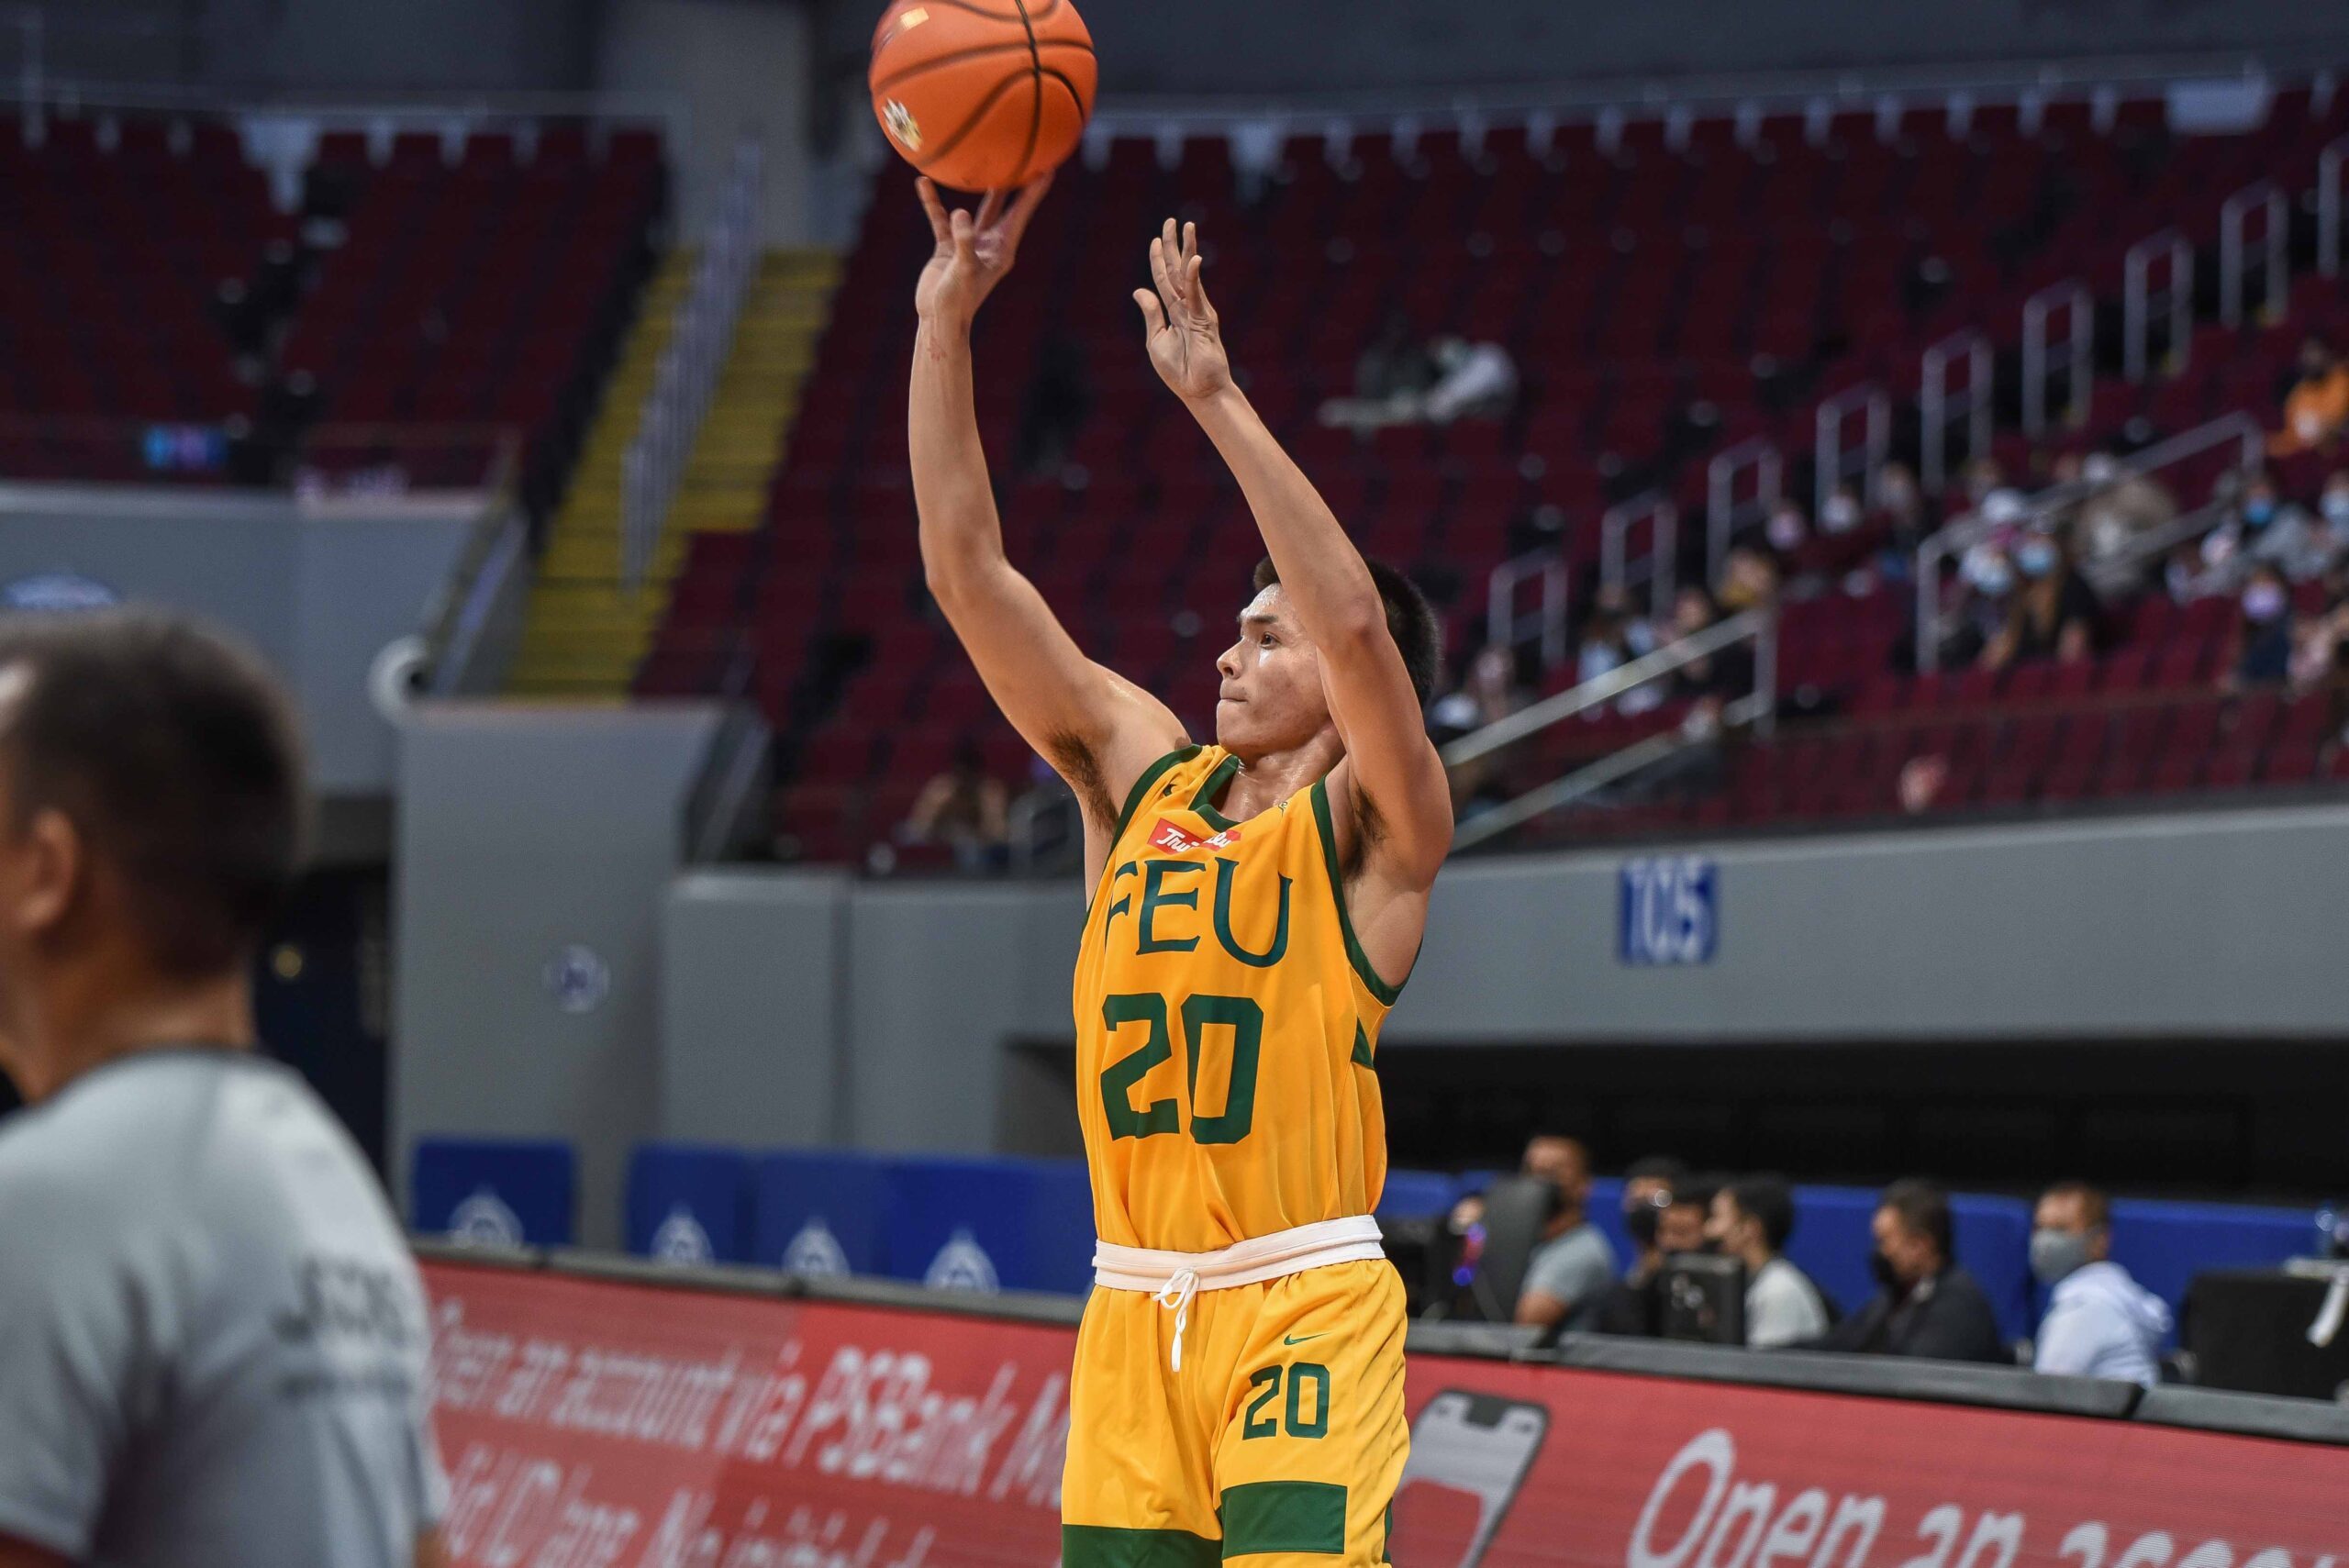 Xyrus Torres drops 8 triples on UE as FEU finally breaks unexpected skid